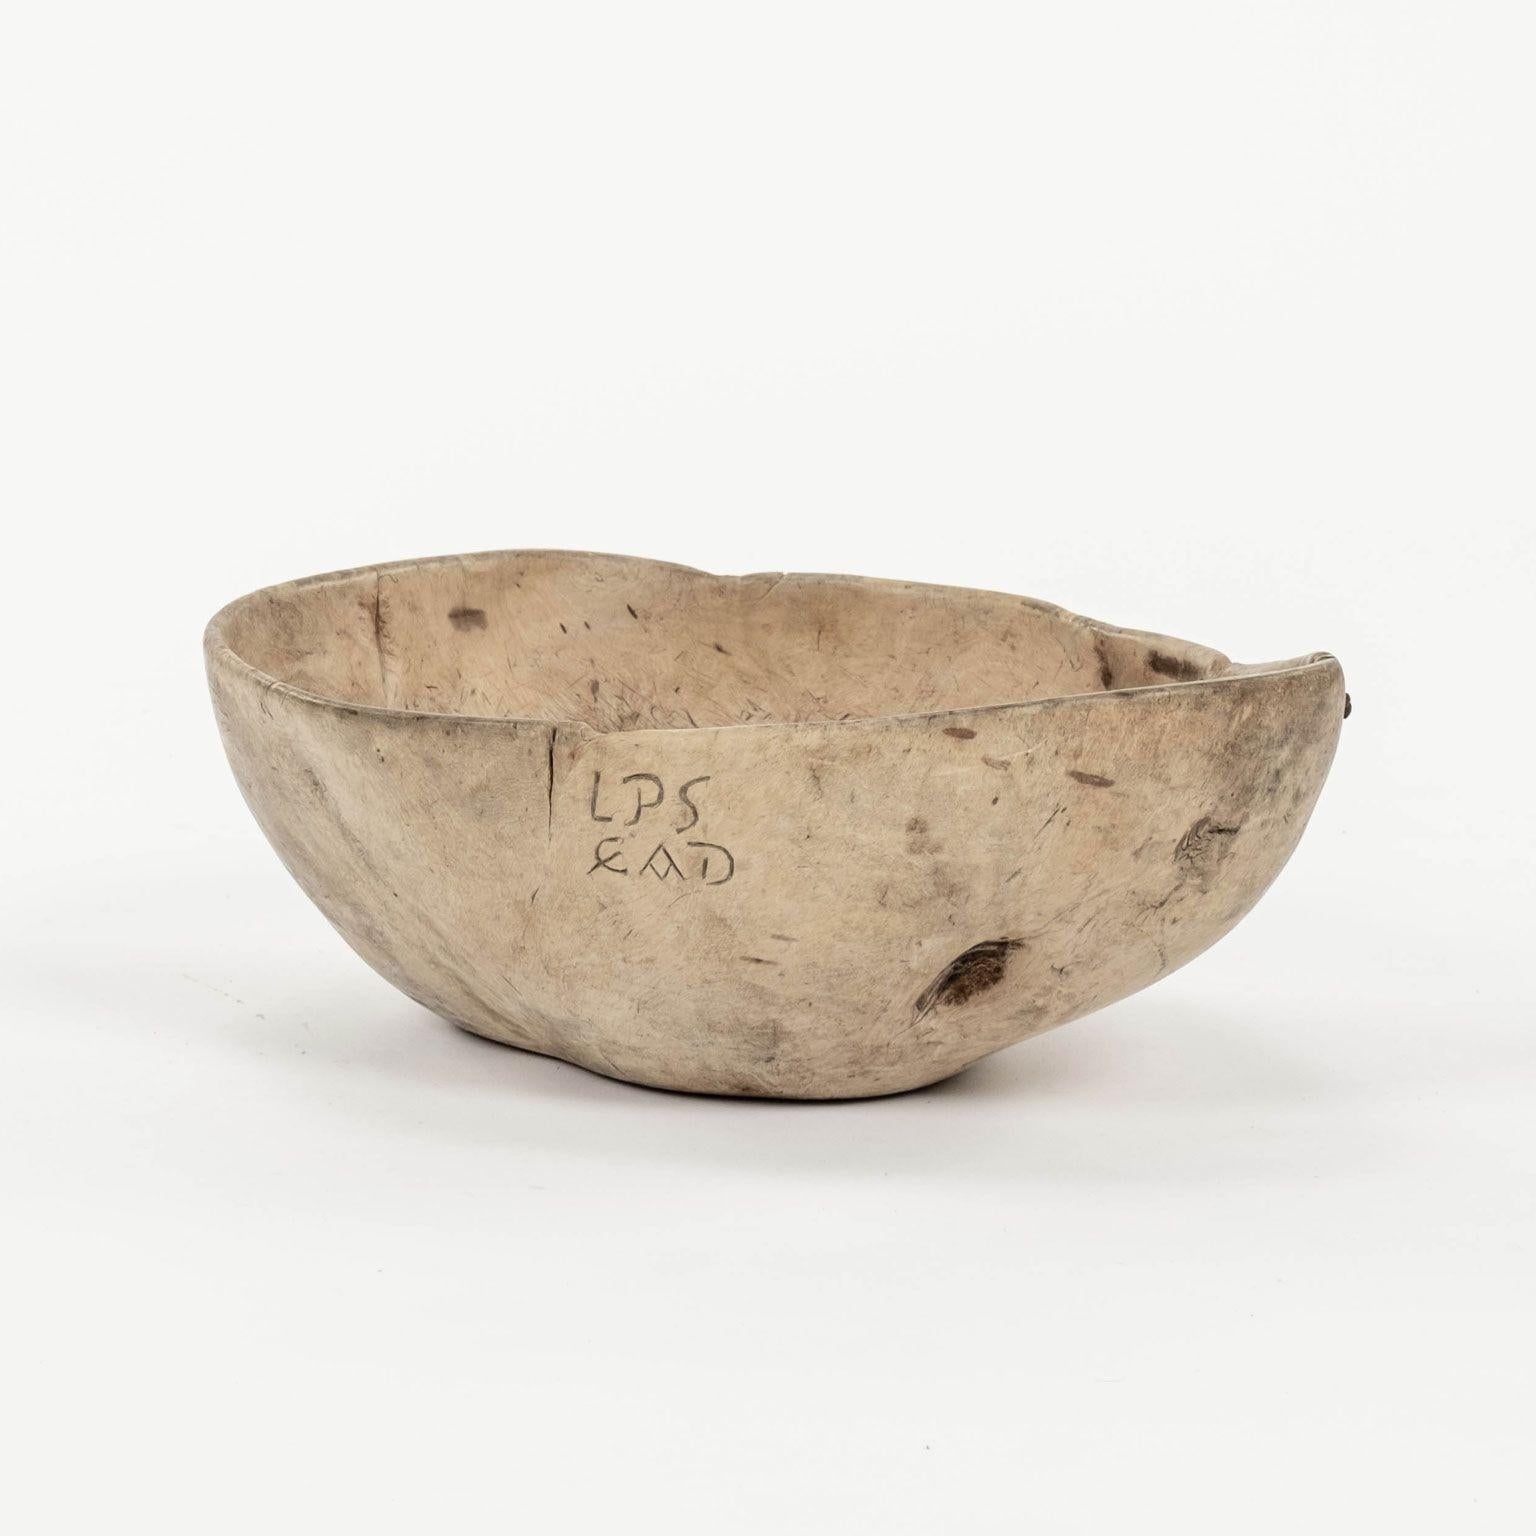 Sublime organically-shaped primitive 18th Century Scandavian root bowl. Remarkable naturally bleached pale, dry finish. Beautiful subtle wood grain. Marked with the initials 